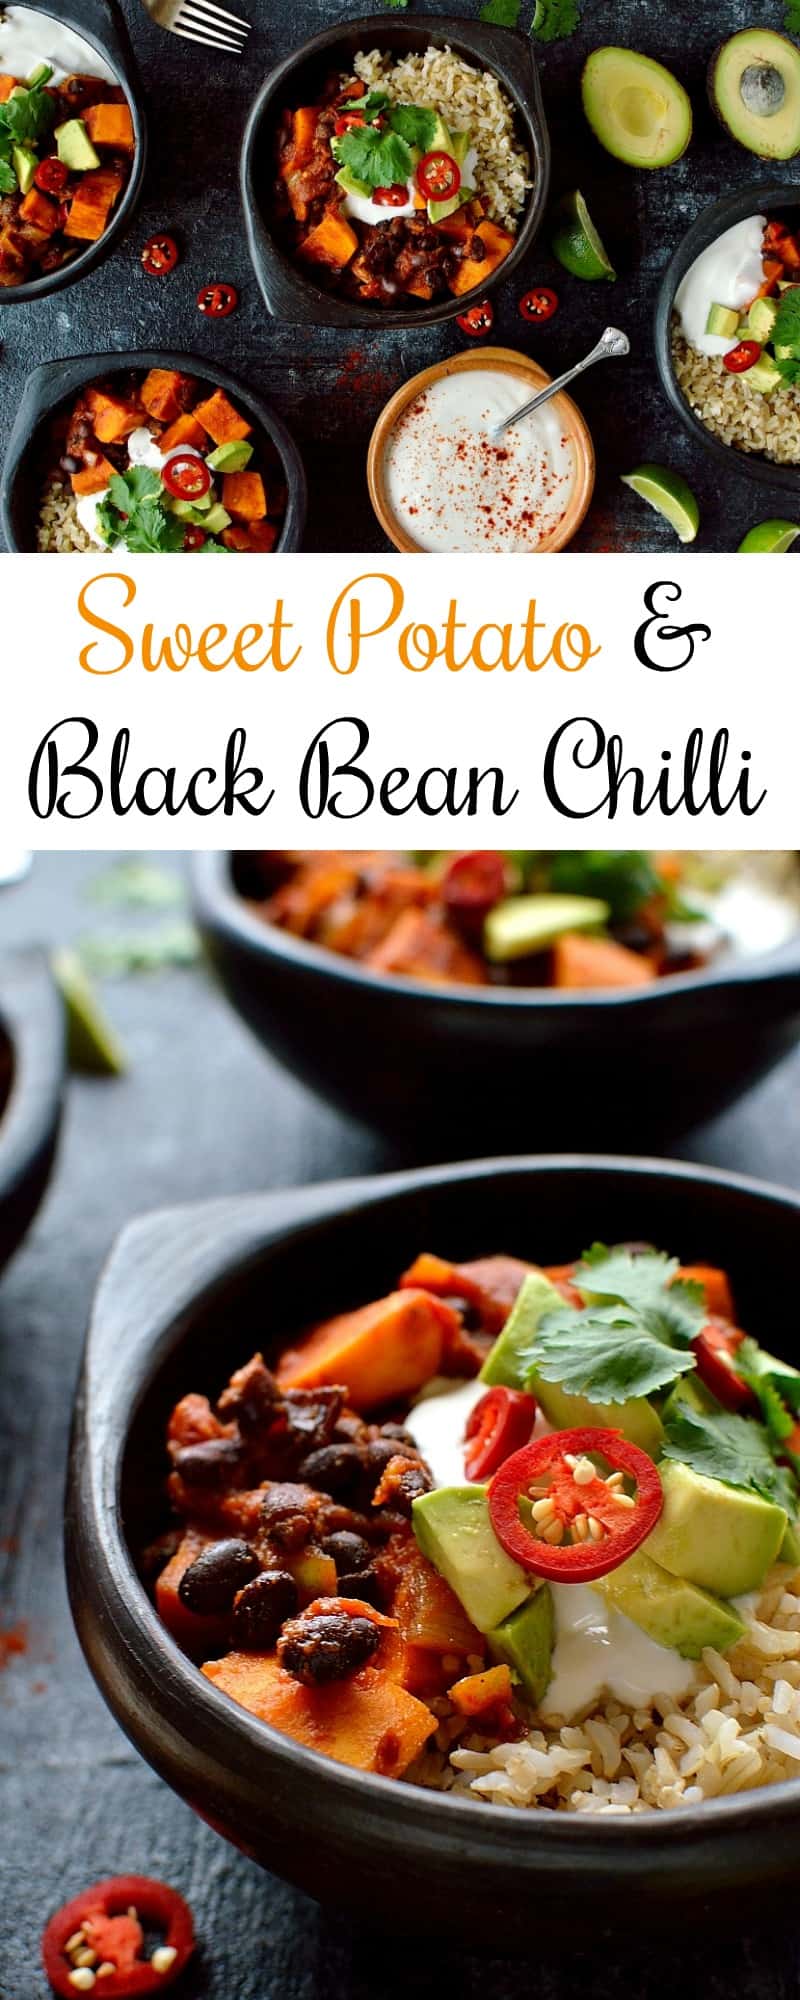 Sweet potato and black bean chilli – an easy, comforting vegan meal for the colder months.